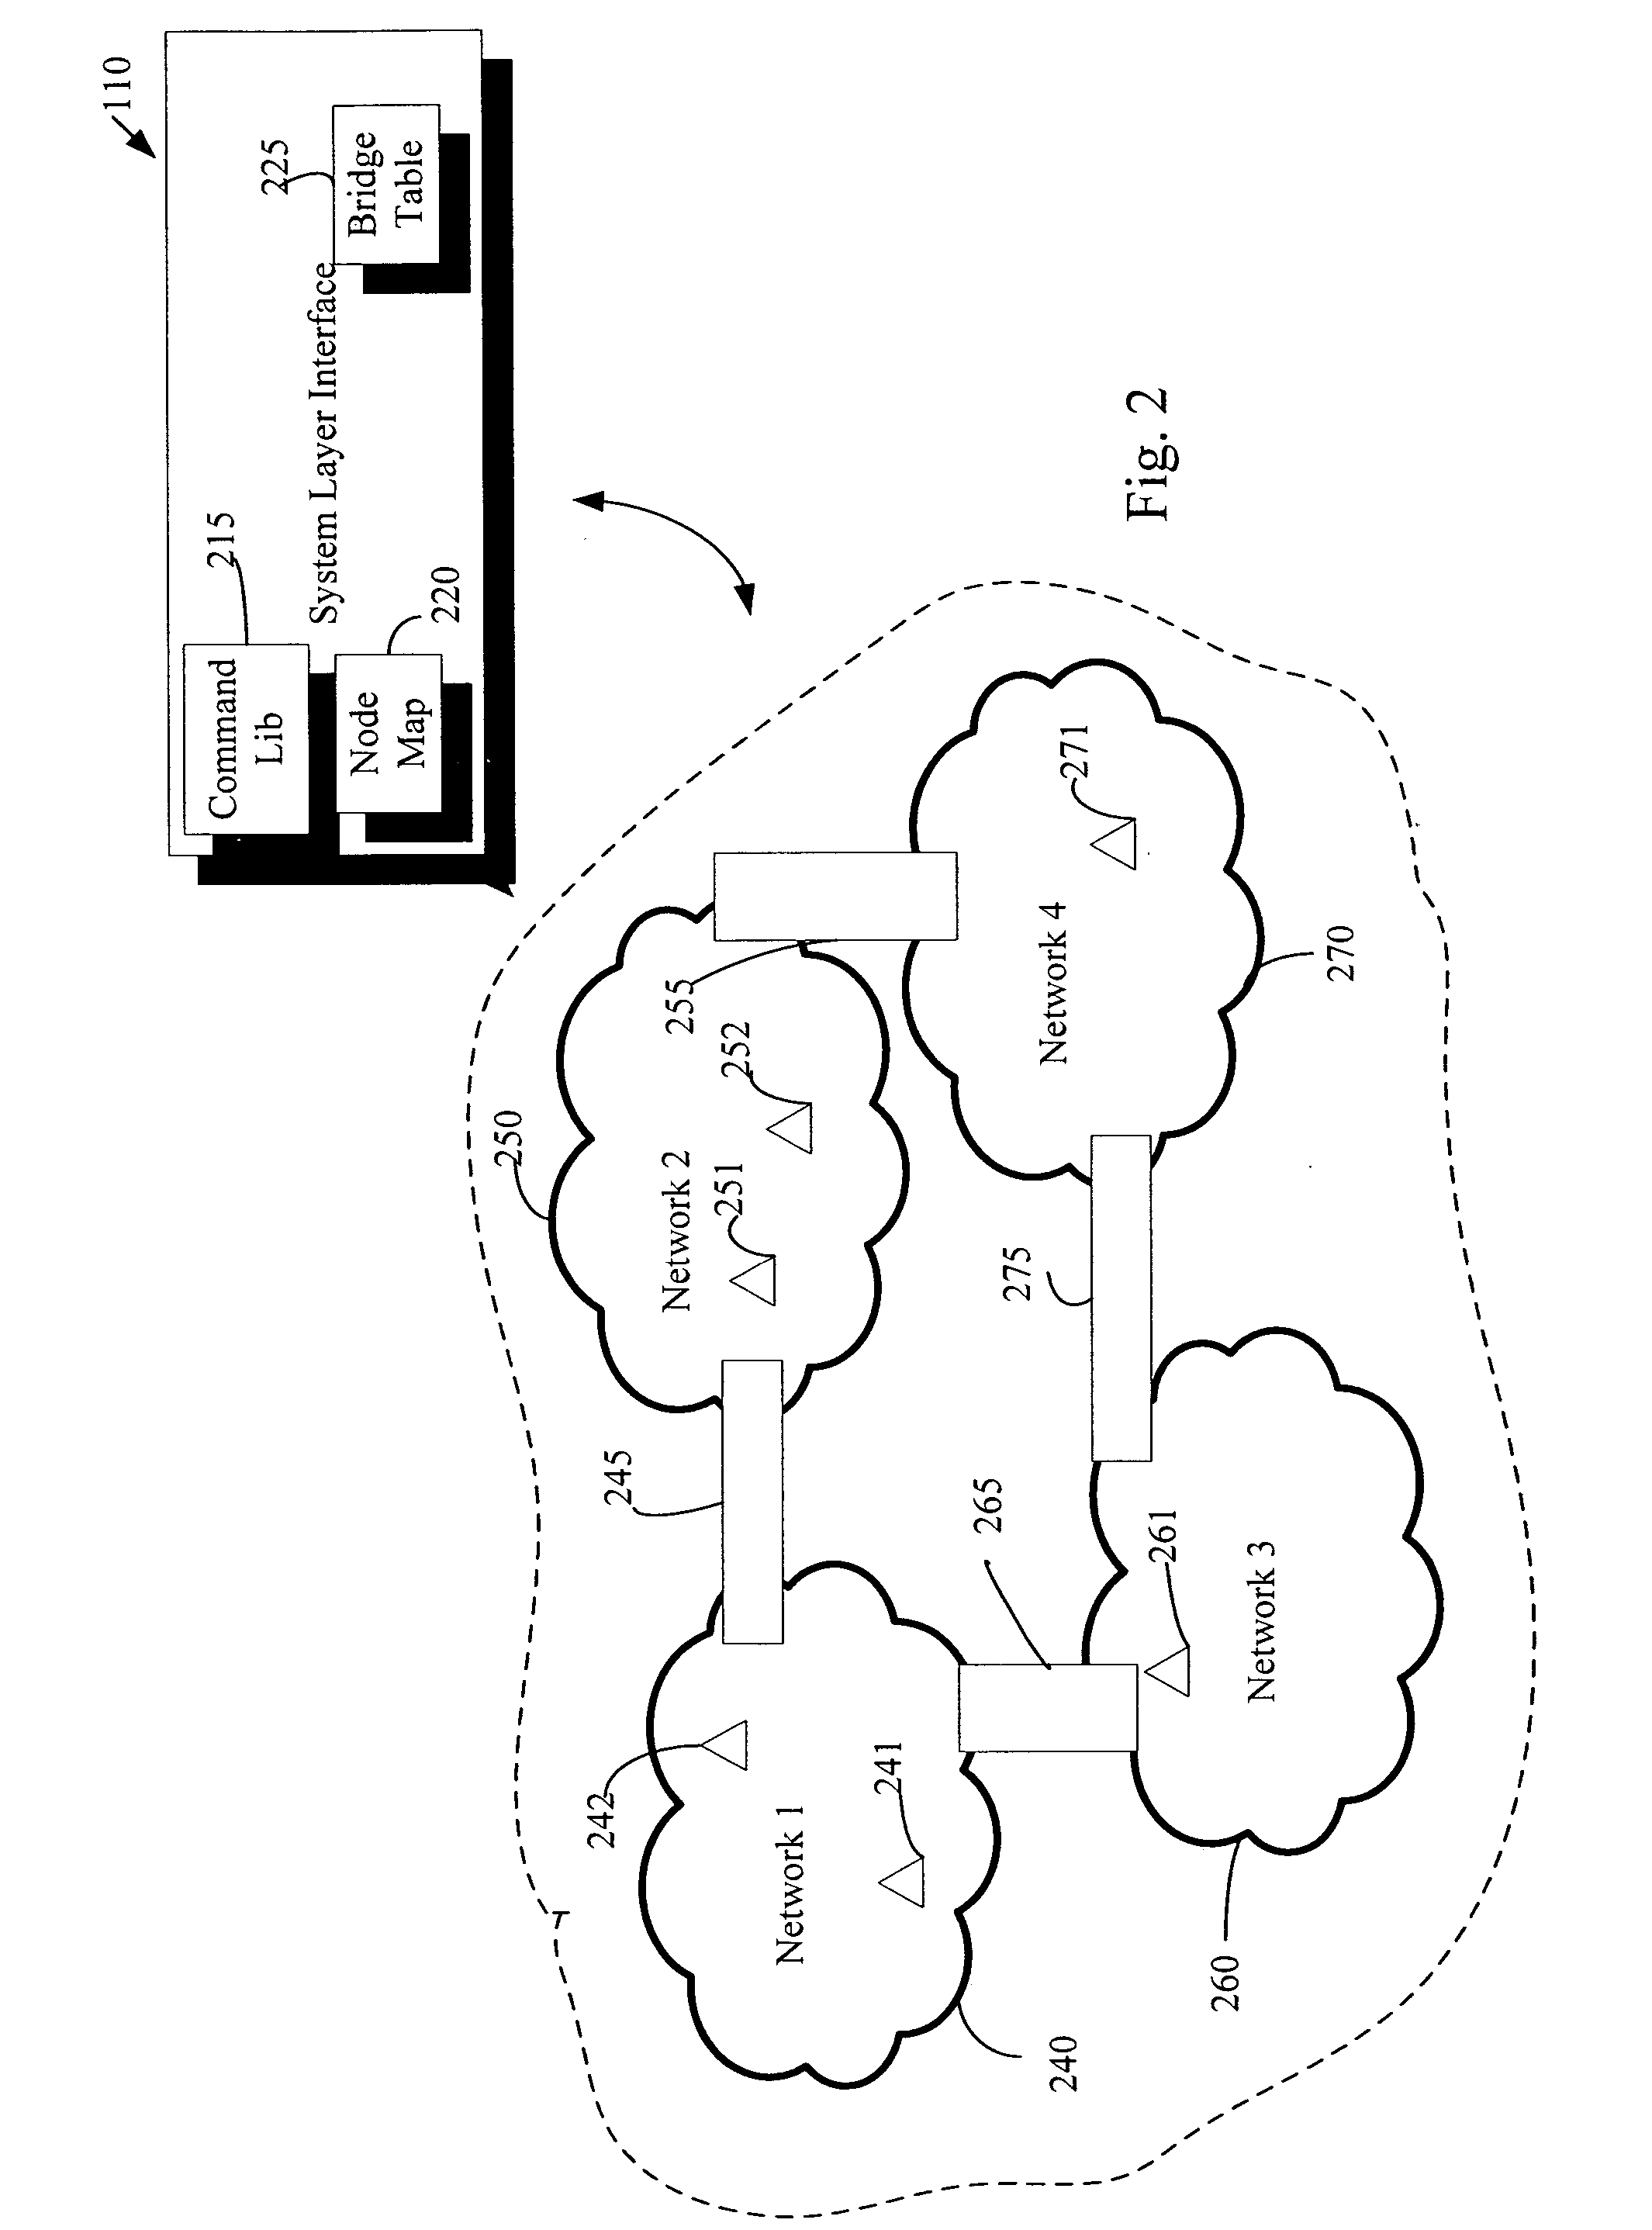 Messaging in a home automation data transfer system